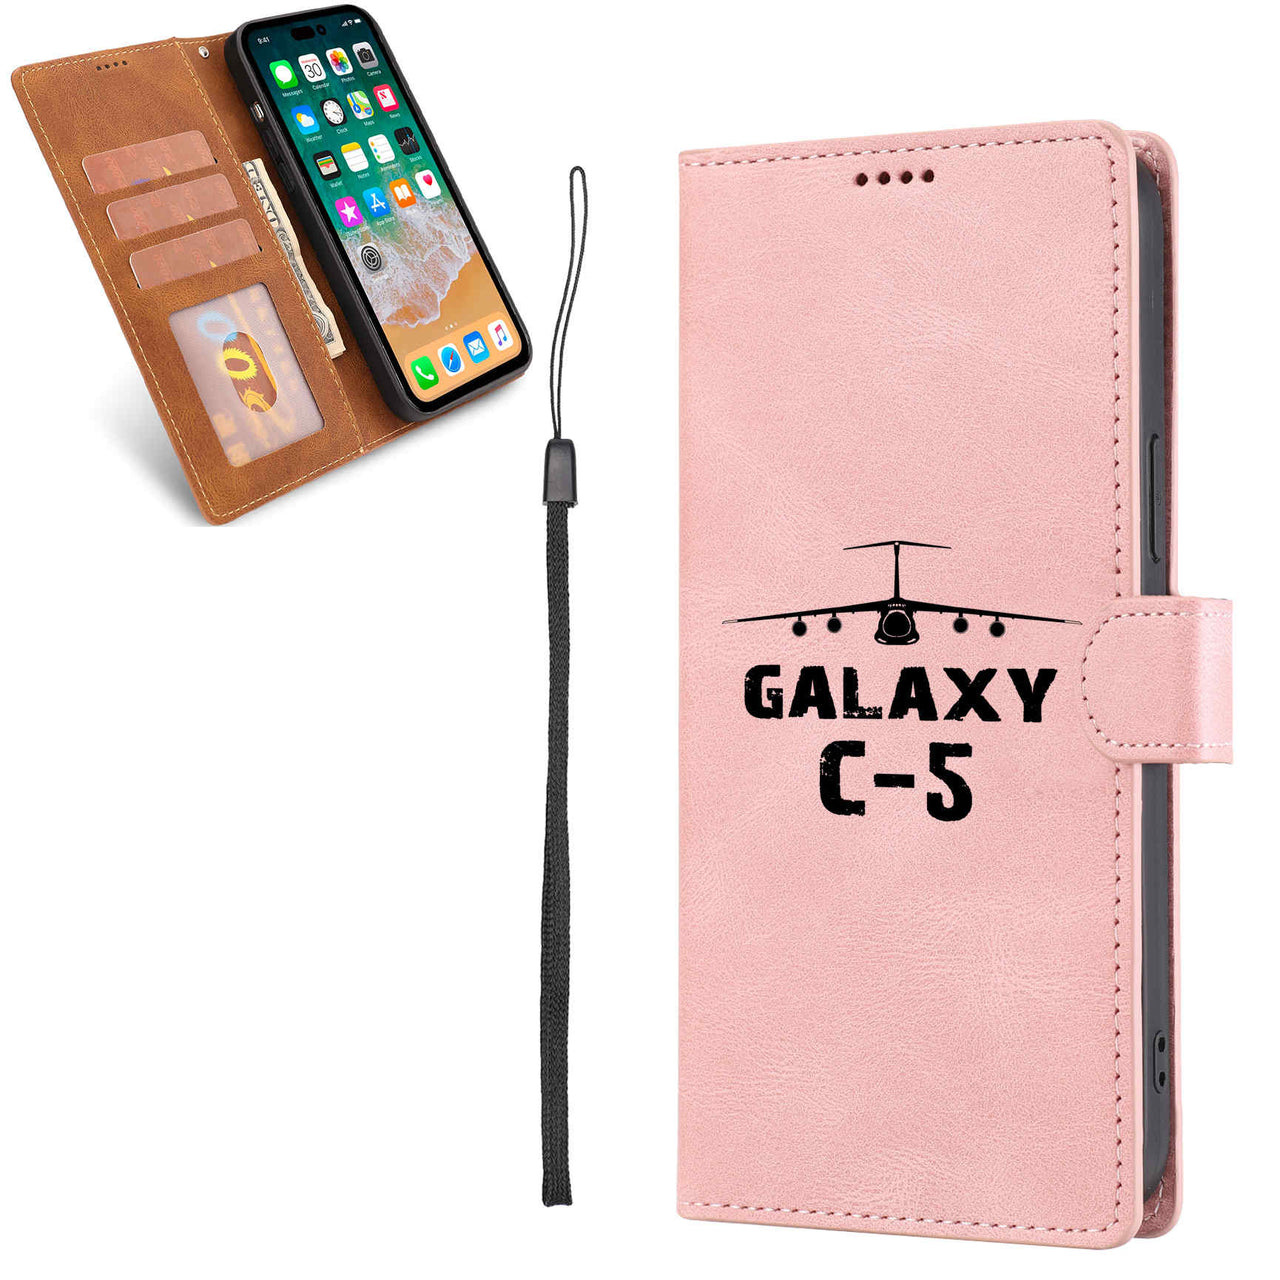 Galaxy C-5 & Plane Designed Leather Samsung S & Note Cases